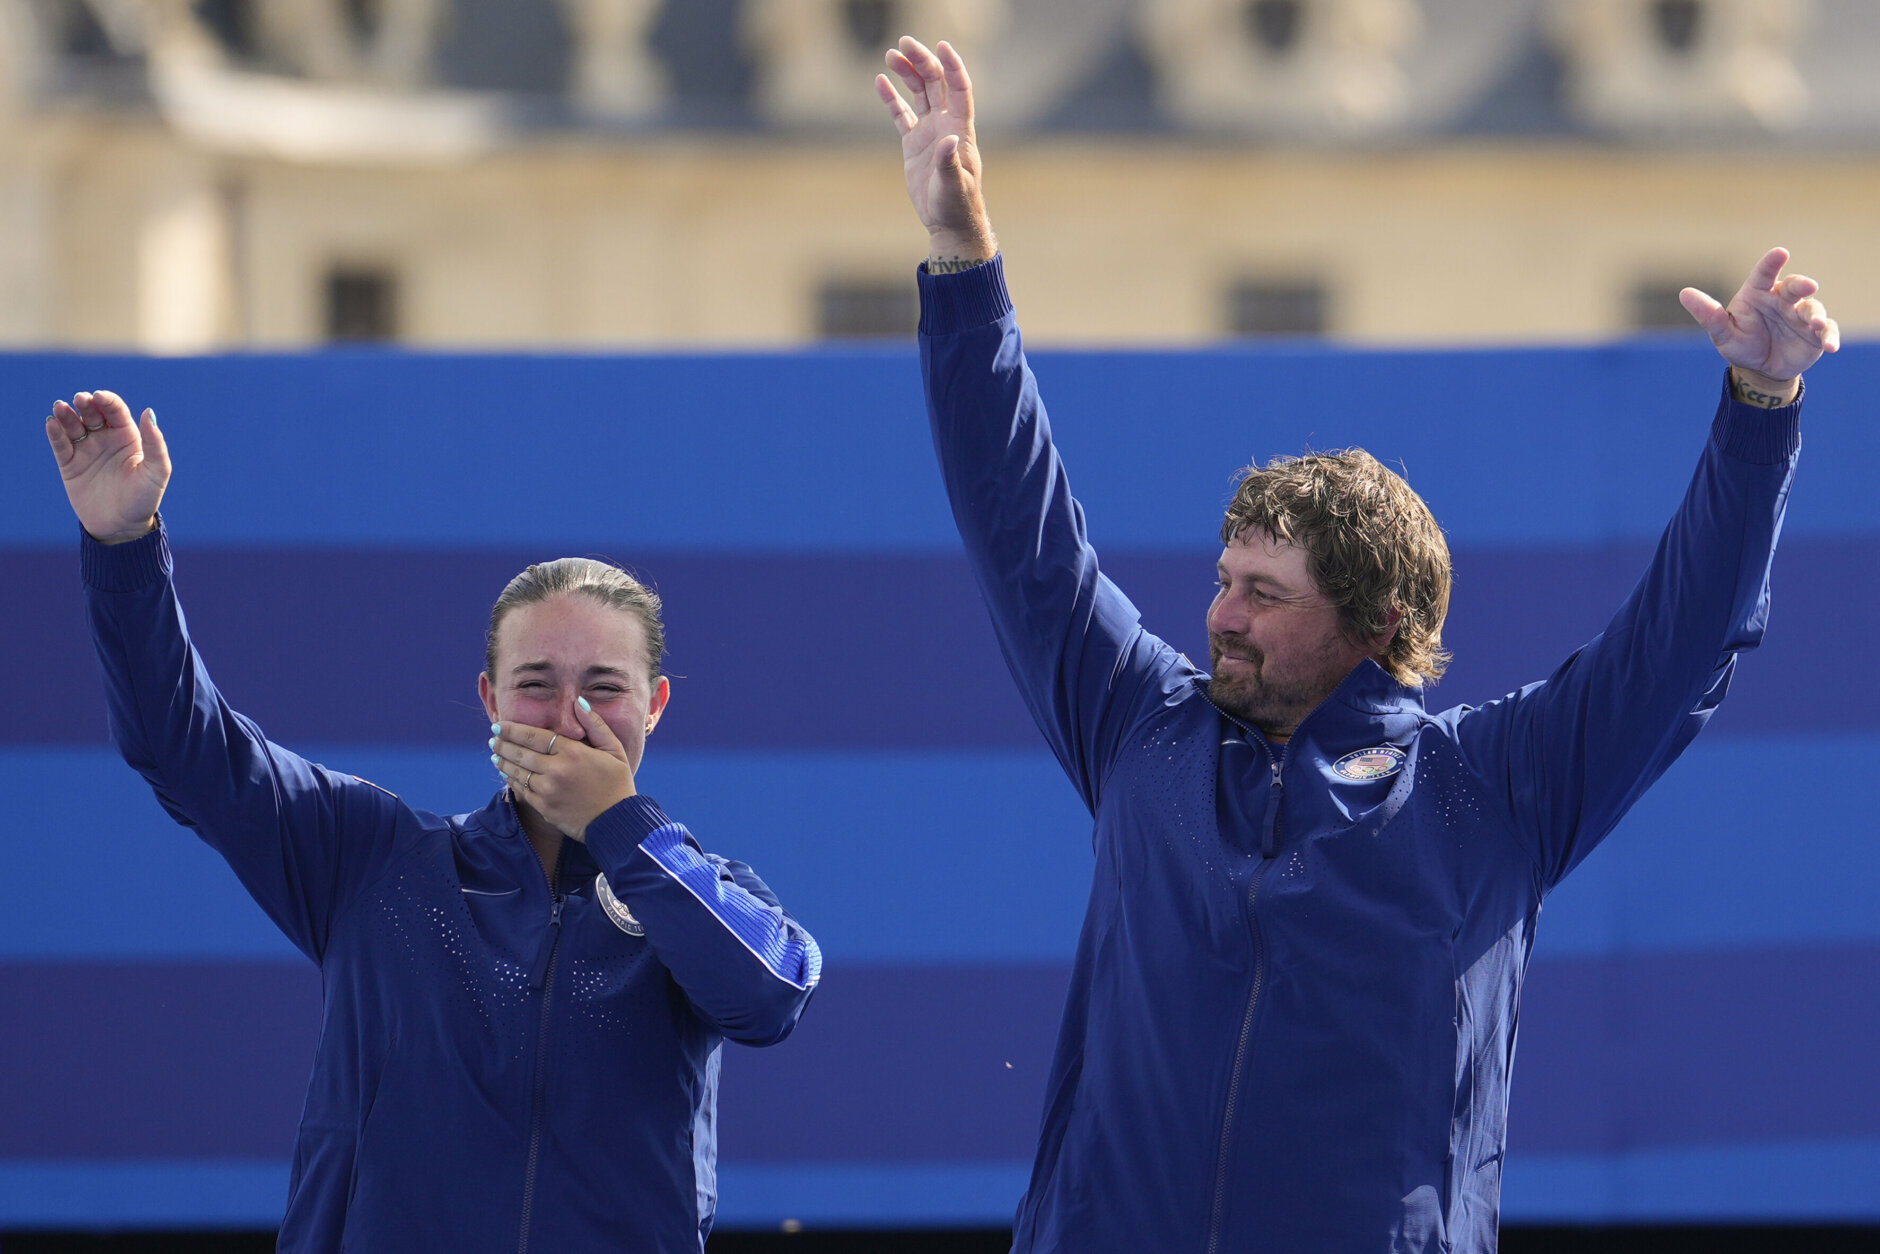 Bronze medal winners, Casey Kaufhold and Brady Ellison of the United States wave from the podium after the Archery mixed team finals at the 2024 Summer Olympics, Friday, Aug. 2, 2024, in Paris, France. (AP Photo/Brynn Anderson)